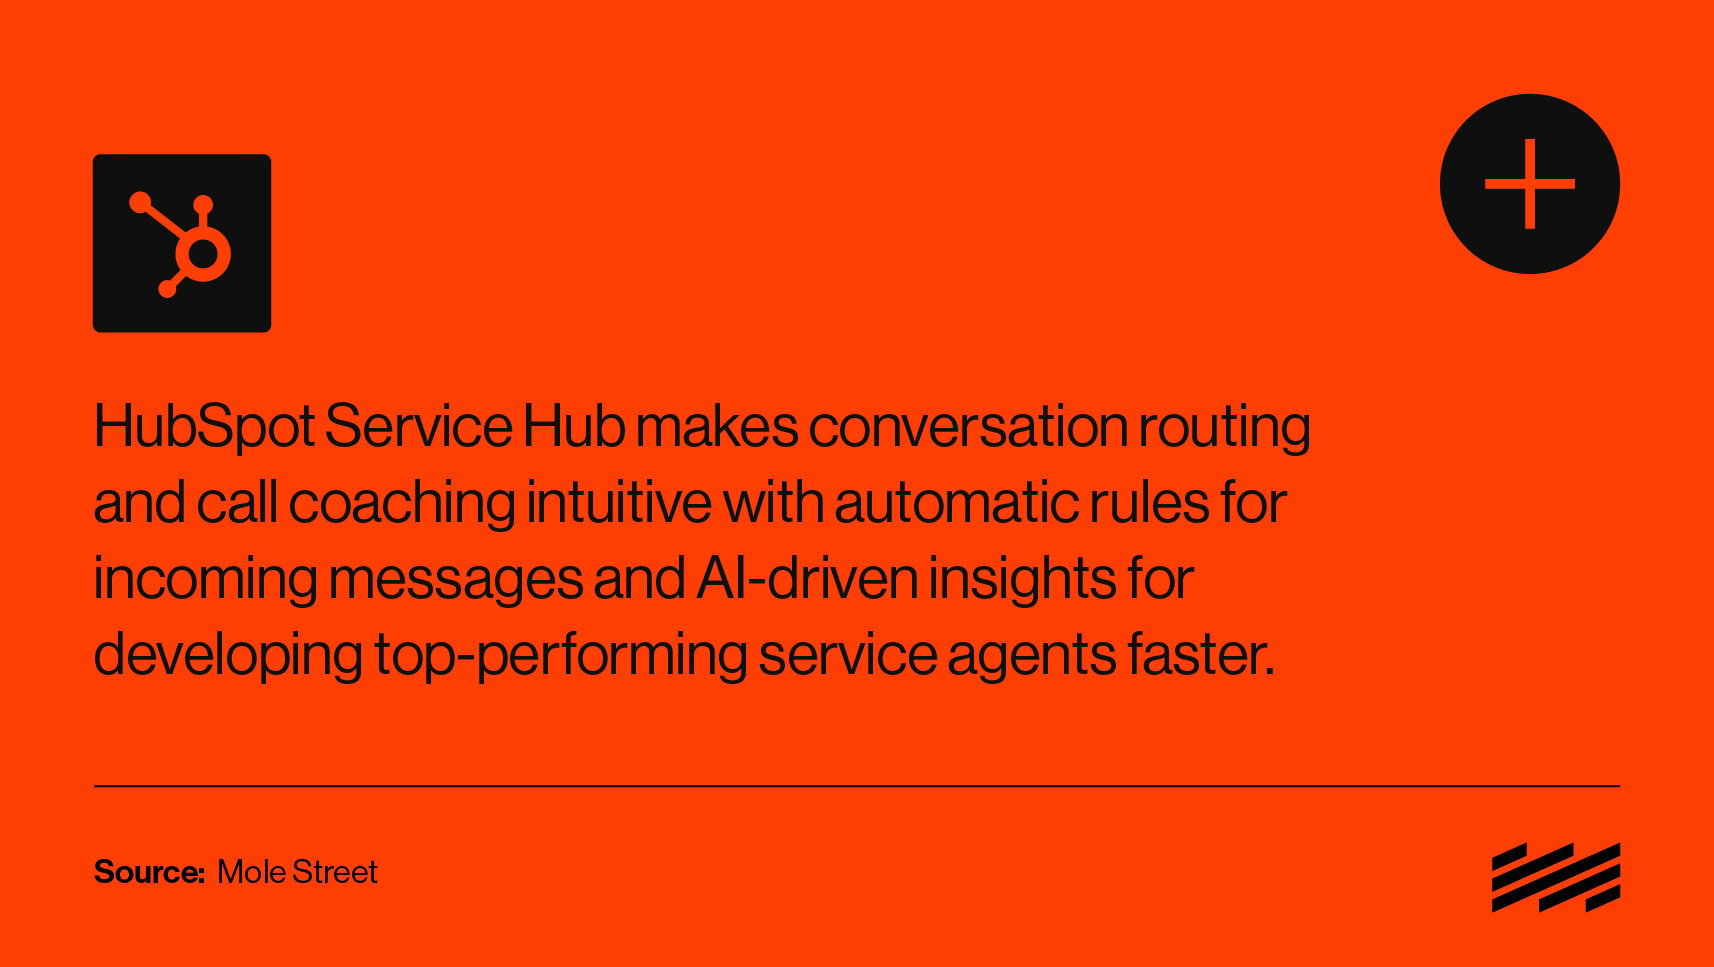 A graphic treatment of text pulled from the article that reads: HubSpot Service Hub makes conversation routing and call coaching intuitive with automatic rules for incoming messages and AI-driven insights for developing top-performing service agents faster.